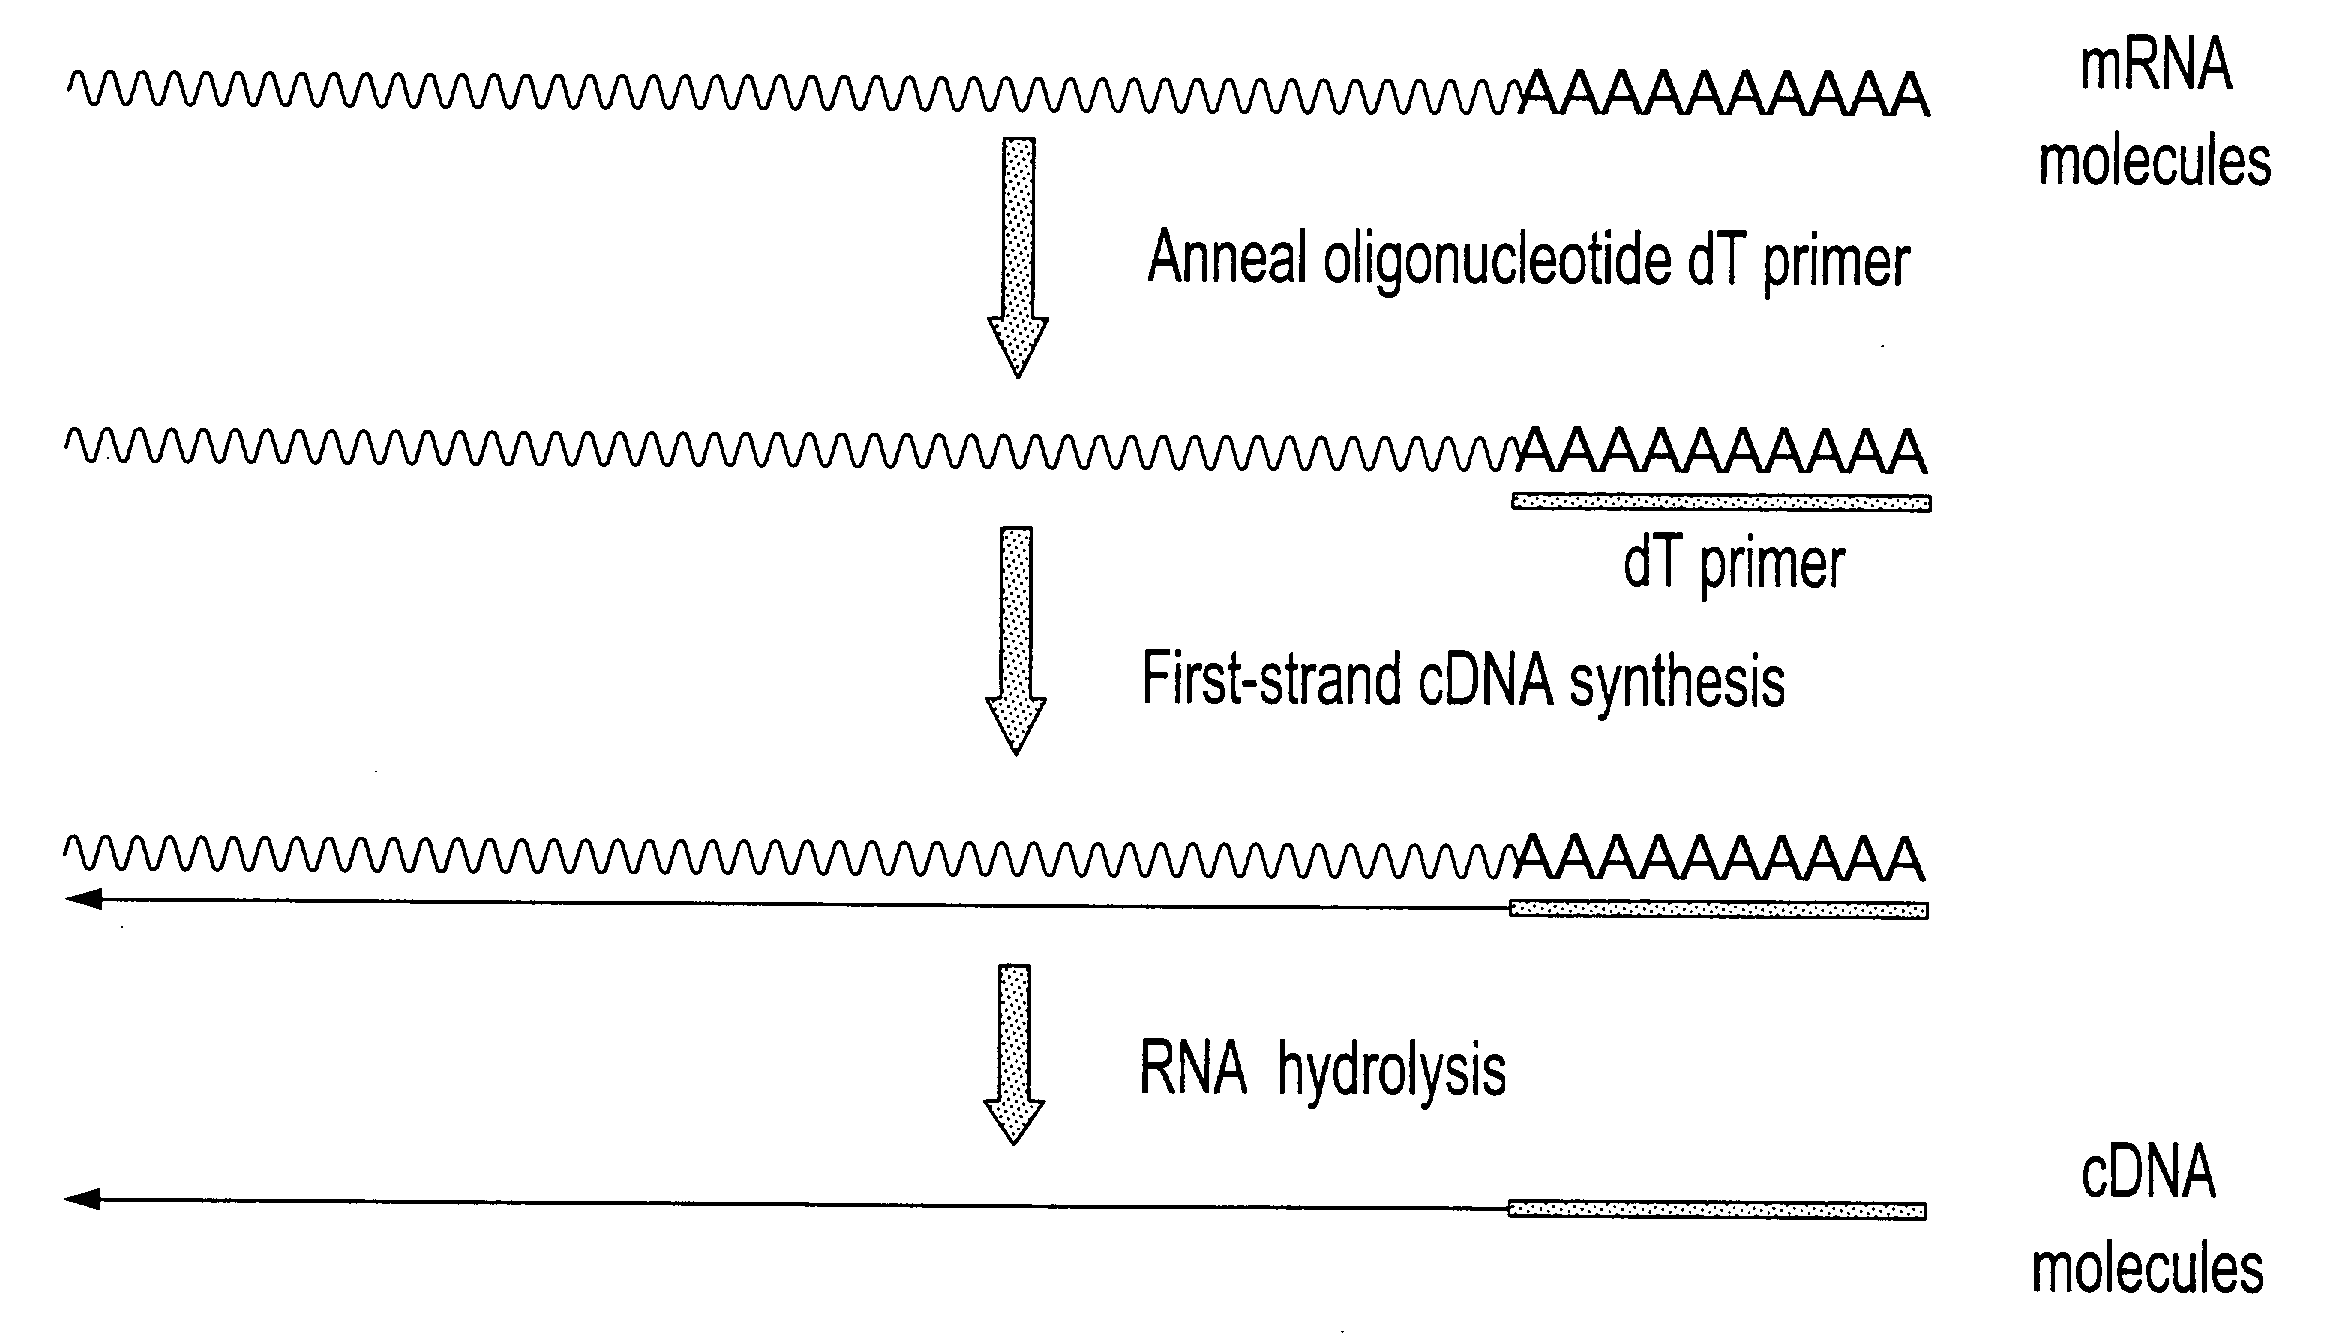 Selective terminal tagging of nucleic acids